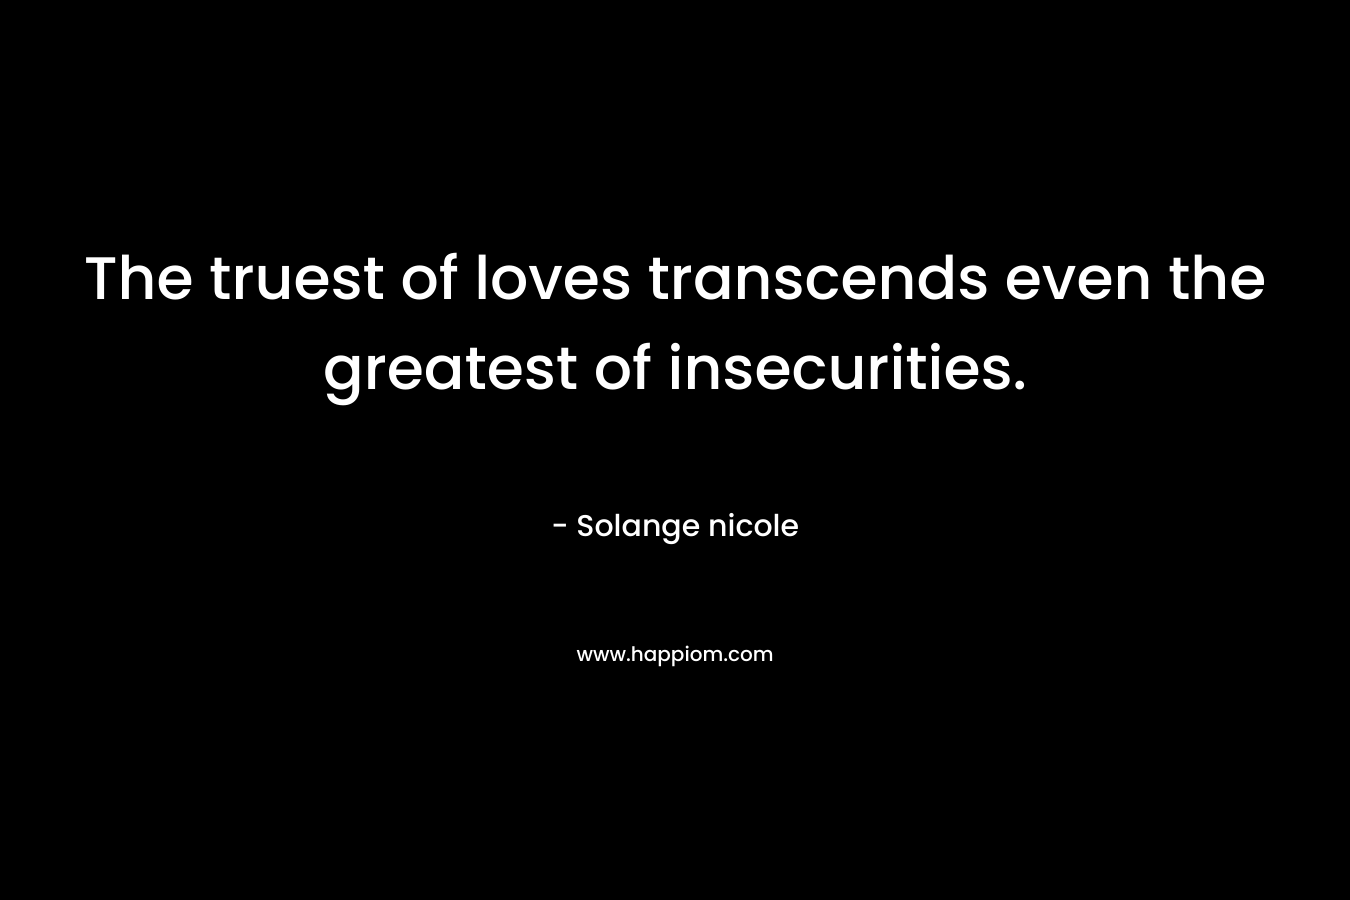 The truest of loves transcends even the greatest of insecurities.